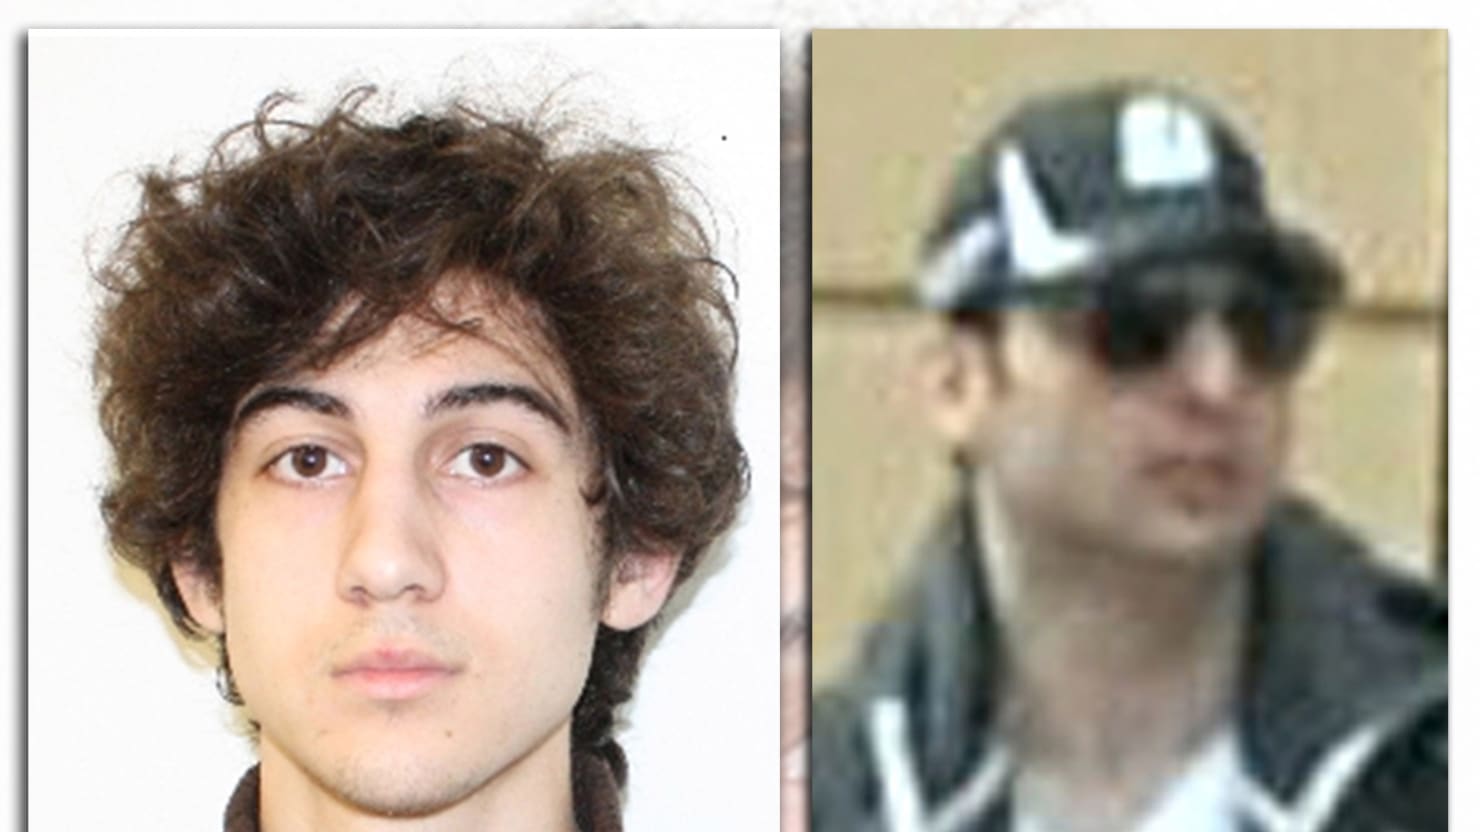 Boston Bombing Suspects: What We Know About the Tsarnaev Brothers